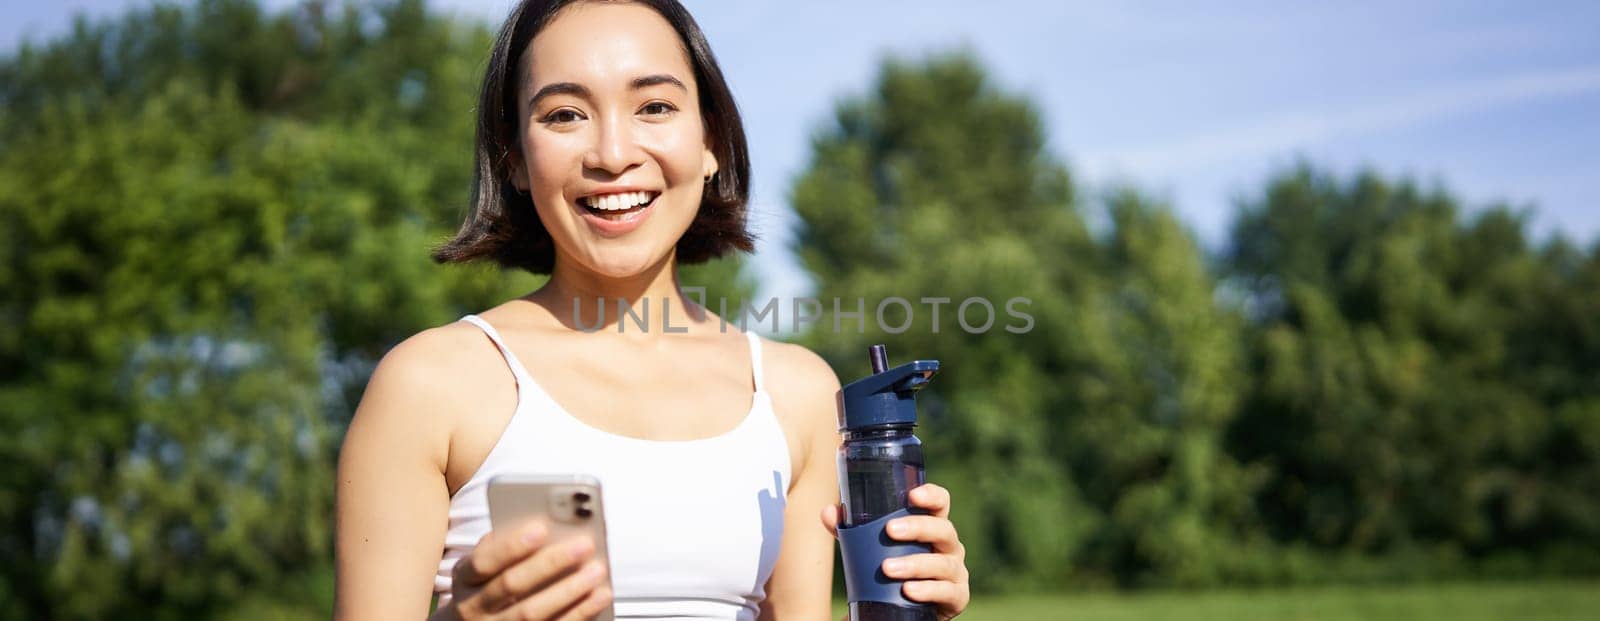 Sportswoman workout with smartphone, drinks water, holds mobile phone and smiles at camera, stands in park.